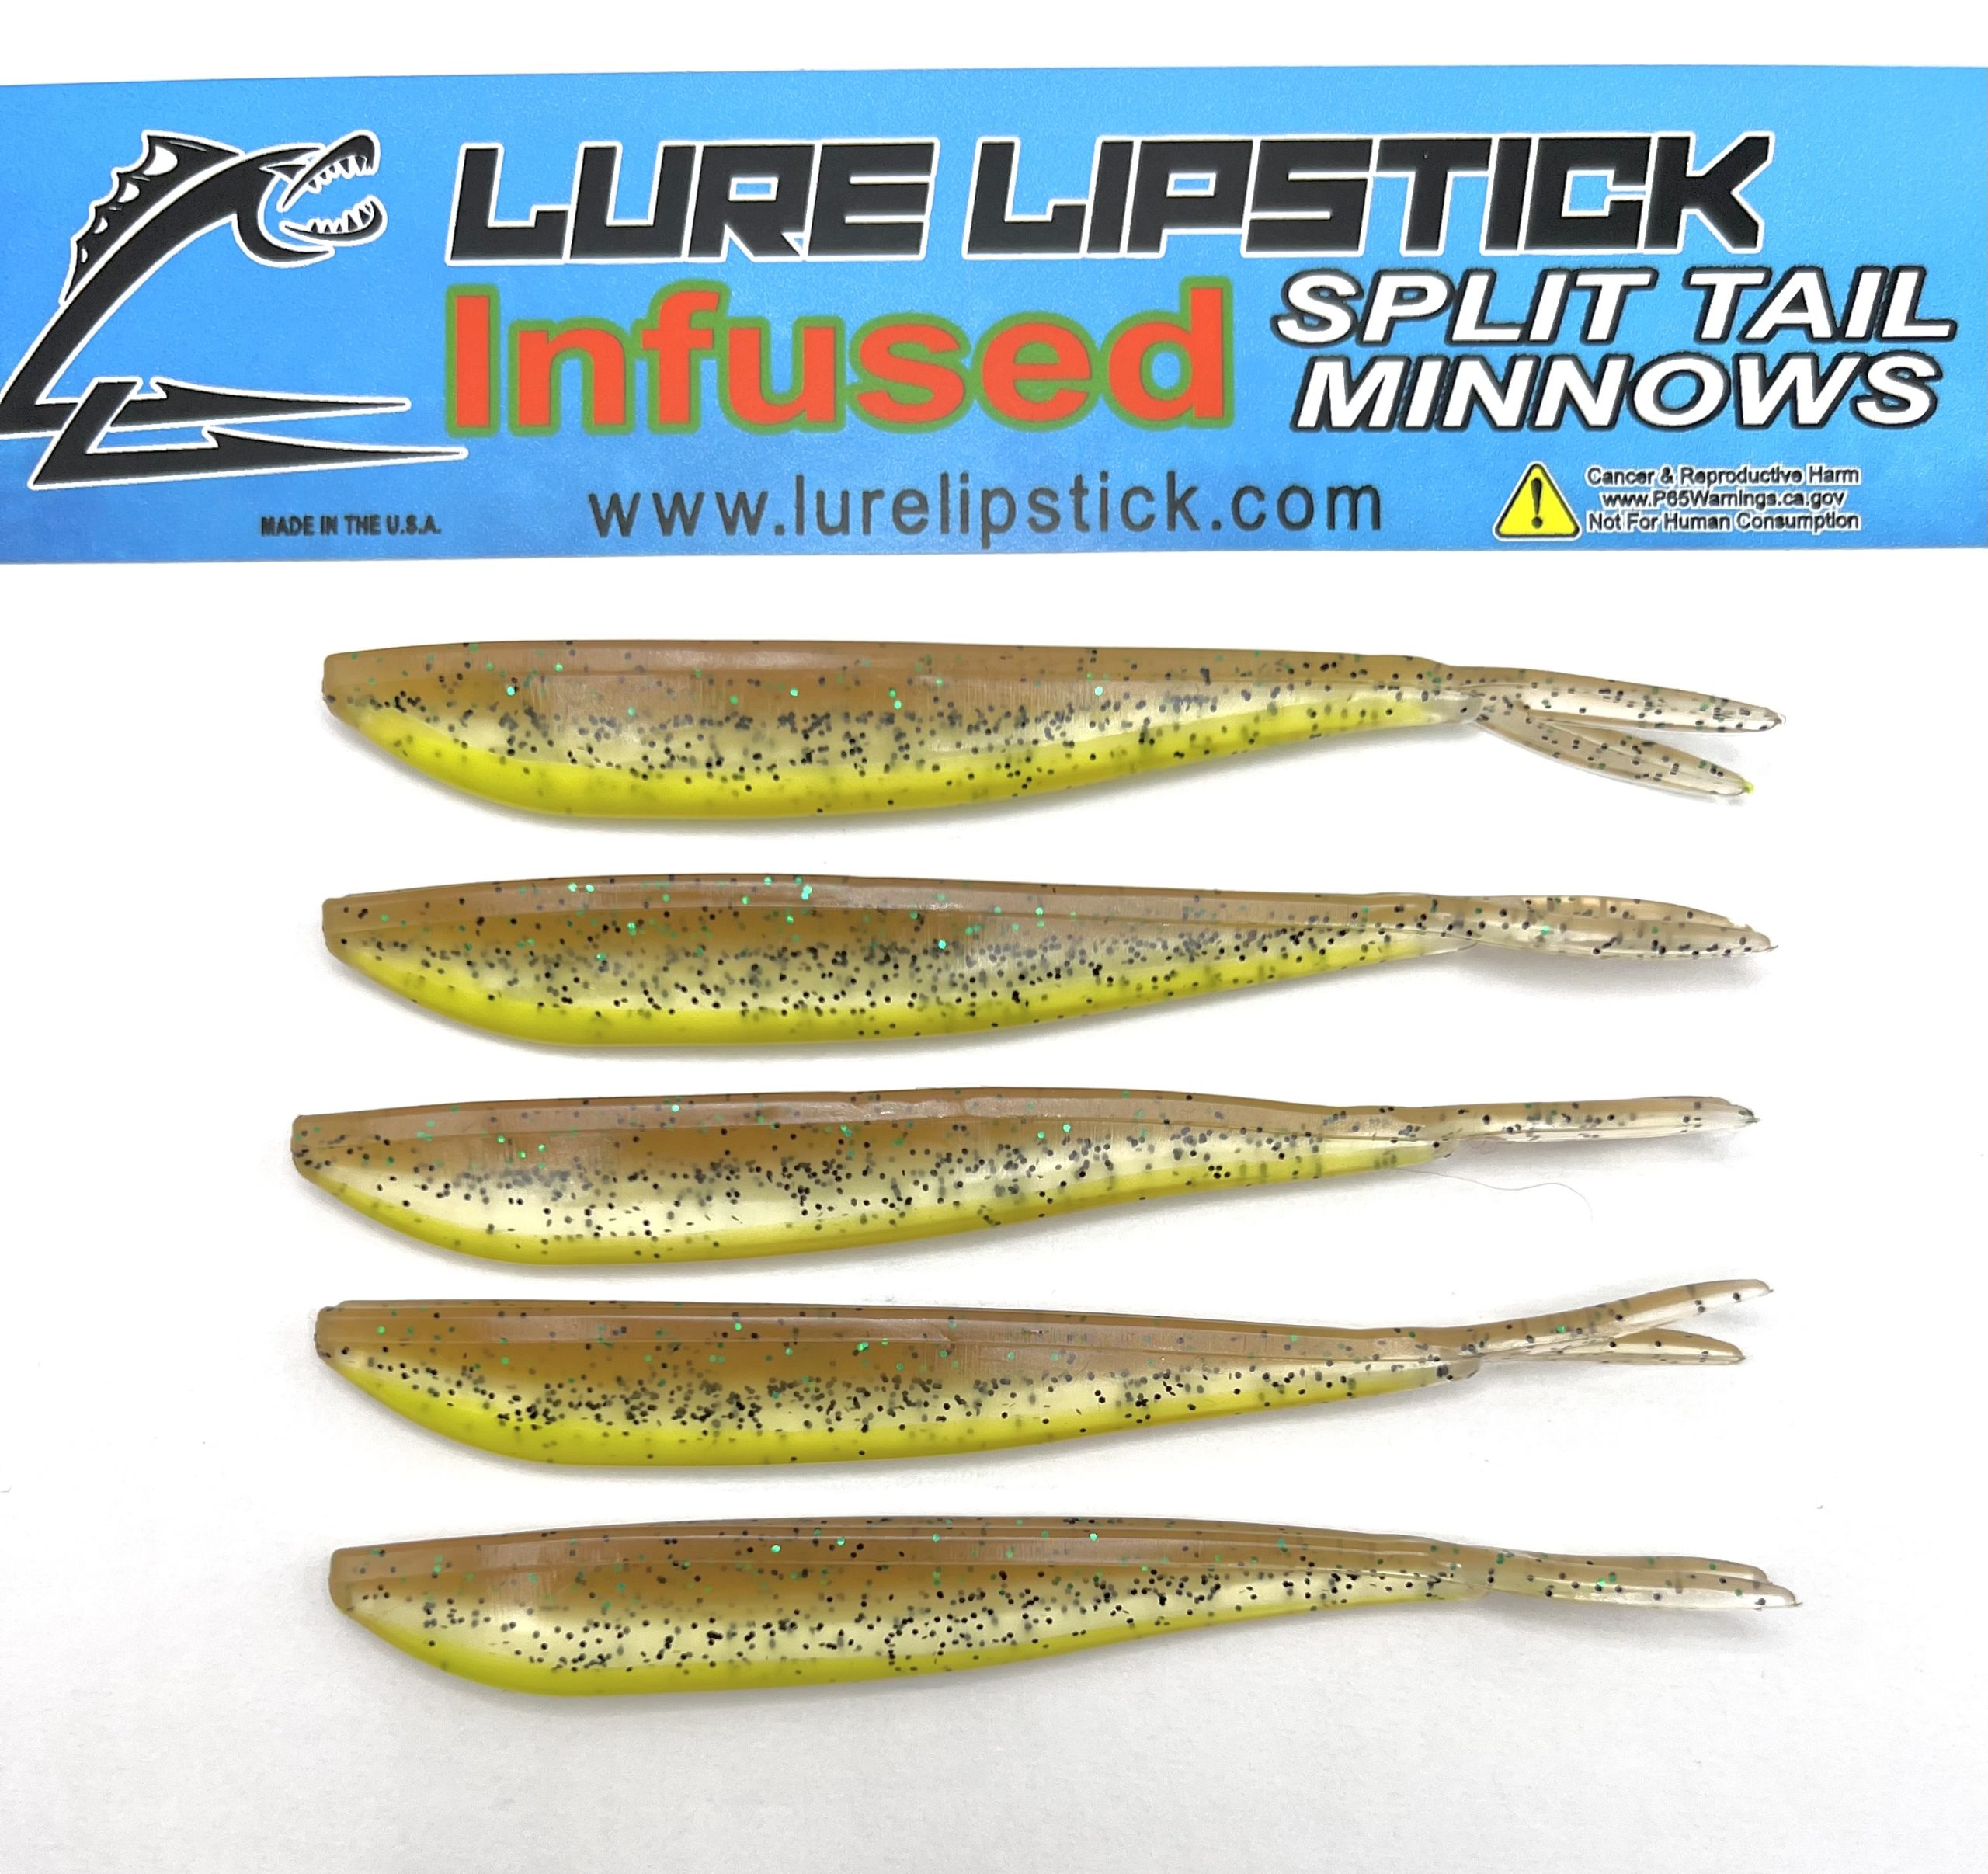 4in 5 Pack Custom Split Tail Minnows – Goby Yellow Belly – Lure